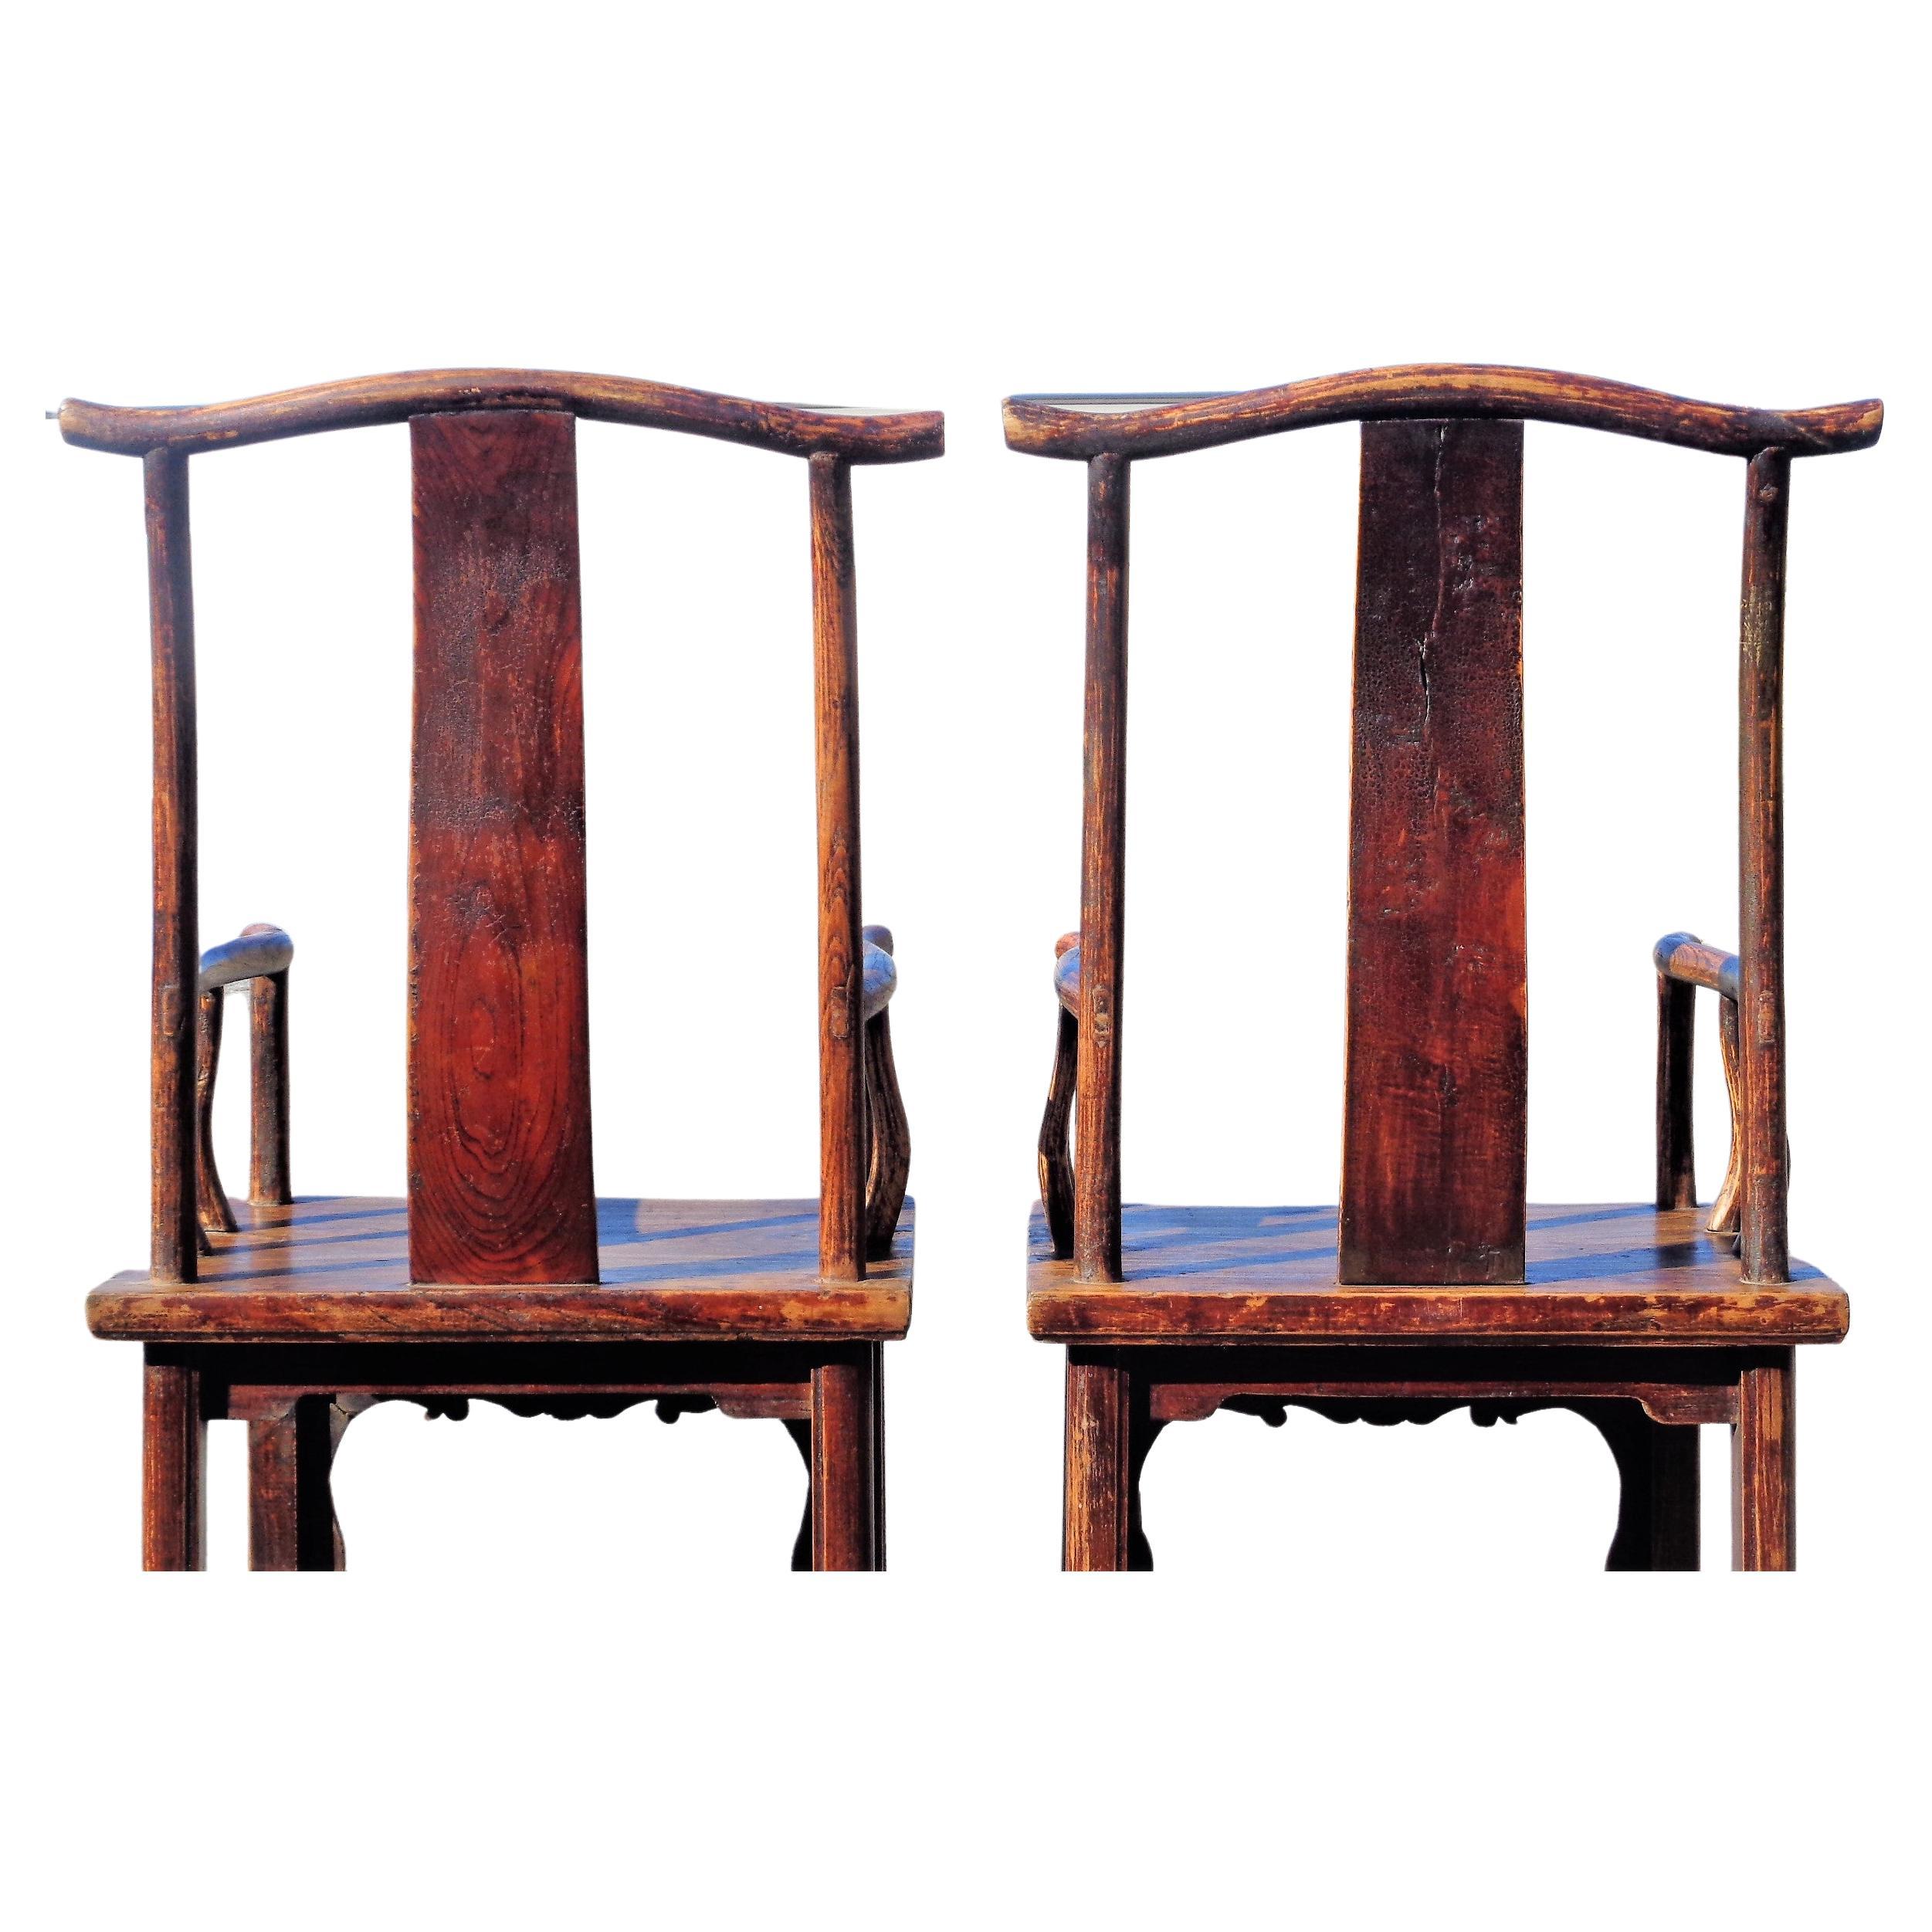 19th C. Chinese Qing Dynasty Hardwood Official's Cap Armchairs  For Sale 4